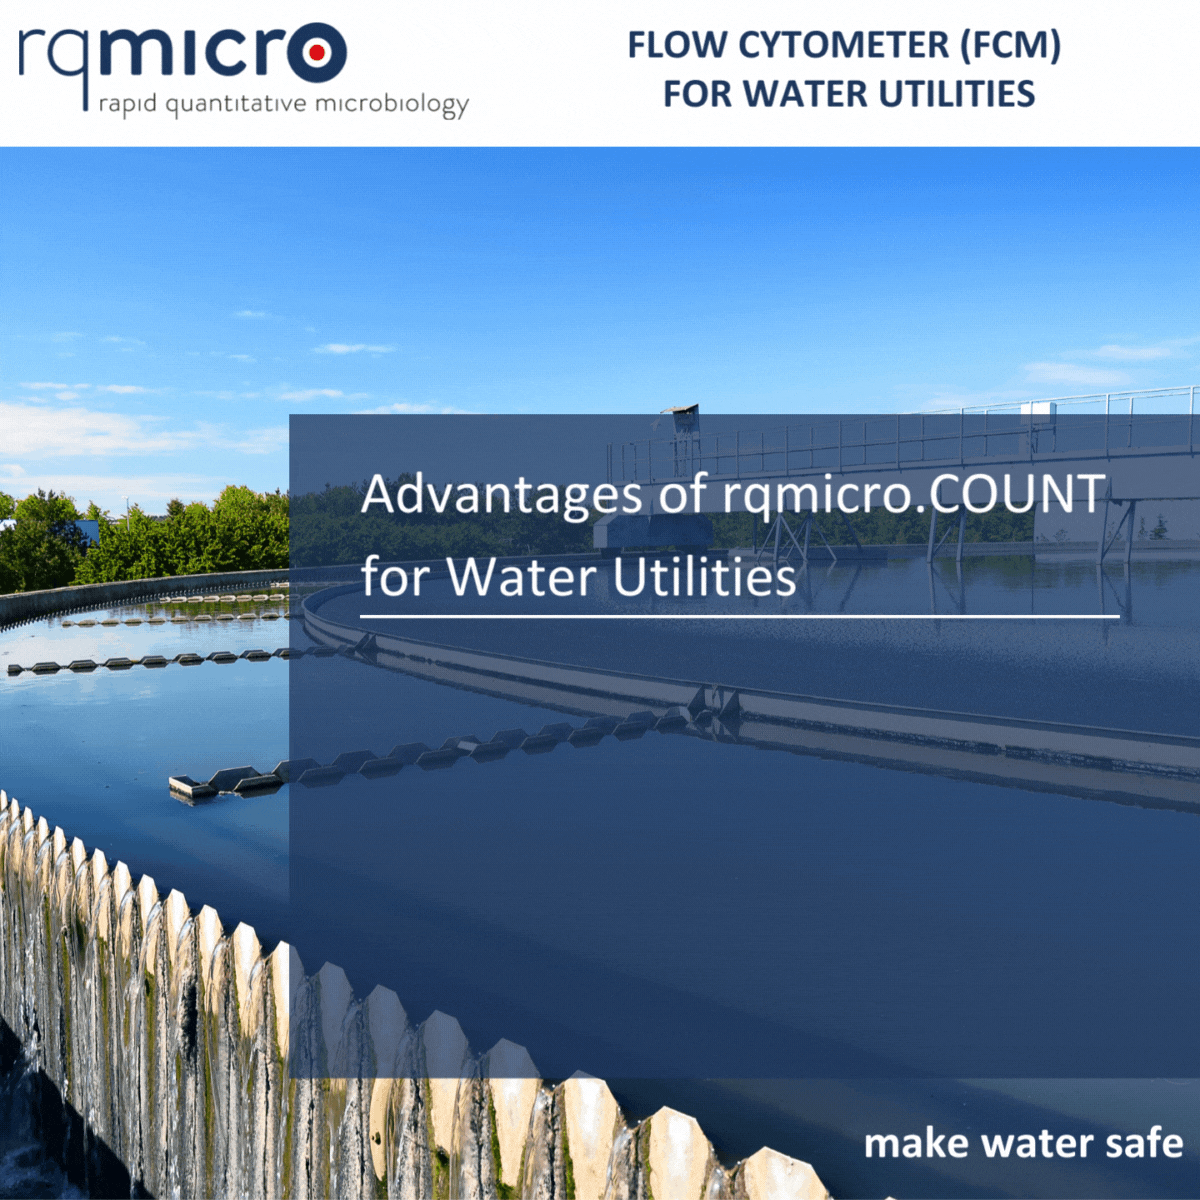 rqmicro.COUNT - Flow Cytometer for Water Utilities